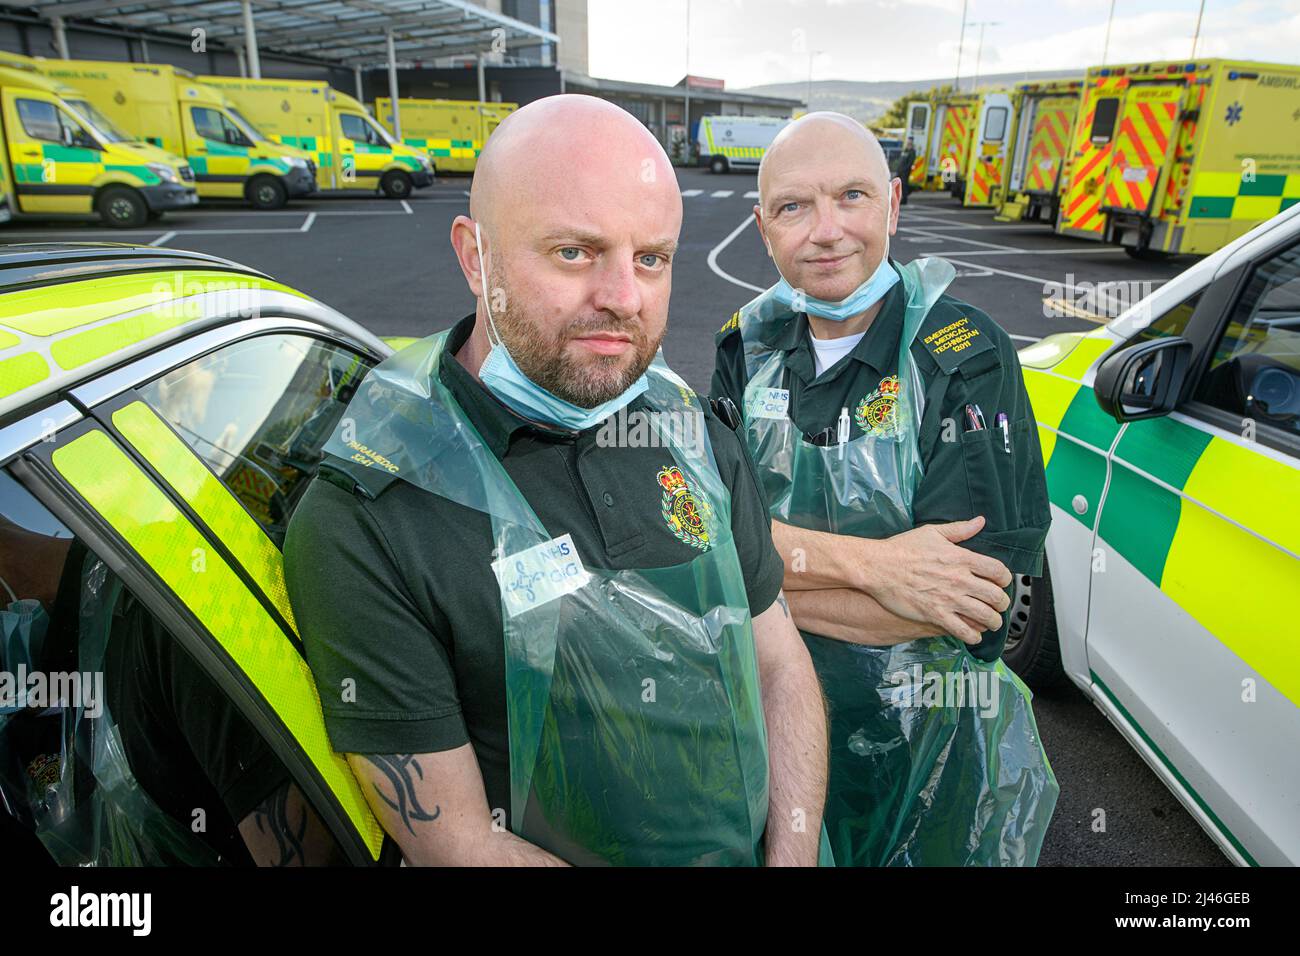 Portrait of a Paramedic and Emergency Medical Technician during the crisis of ambulances being forced to queue at hospitals with their patients inside Stock Photo